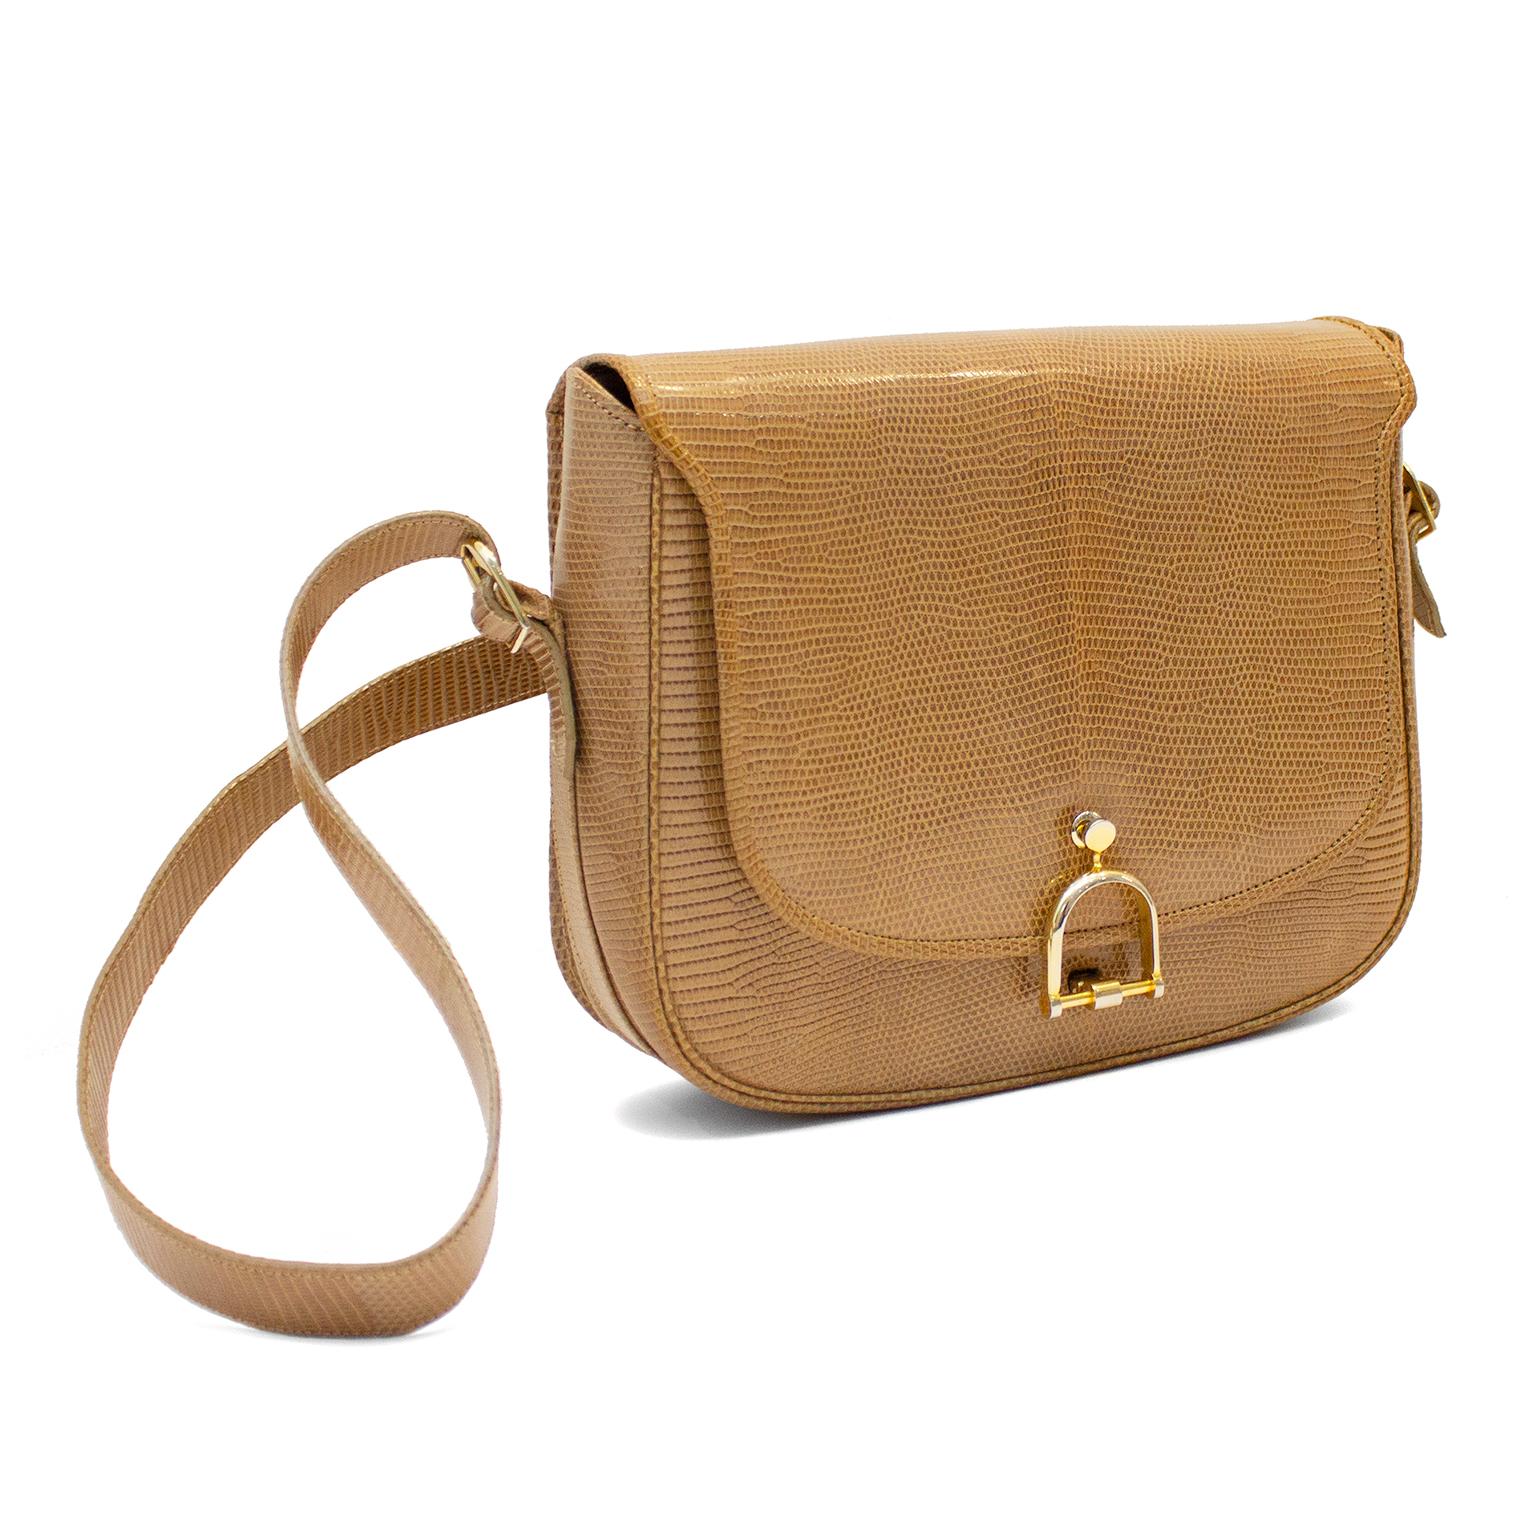 Stunning 1970s tan/taupe embossed skin shoulder bag. Gold tone stirrup detail lock at front. Clean interior. Excellent vintage condition - amazing condition is rare for a bag of this age. Made in Italy for Holt Renfrew Canada. 9